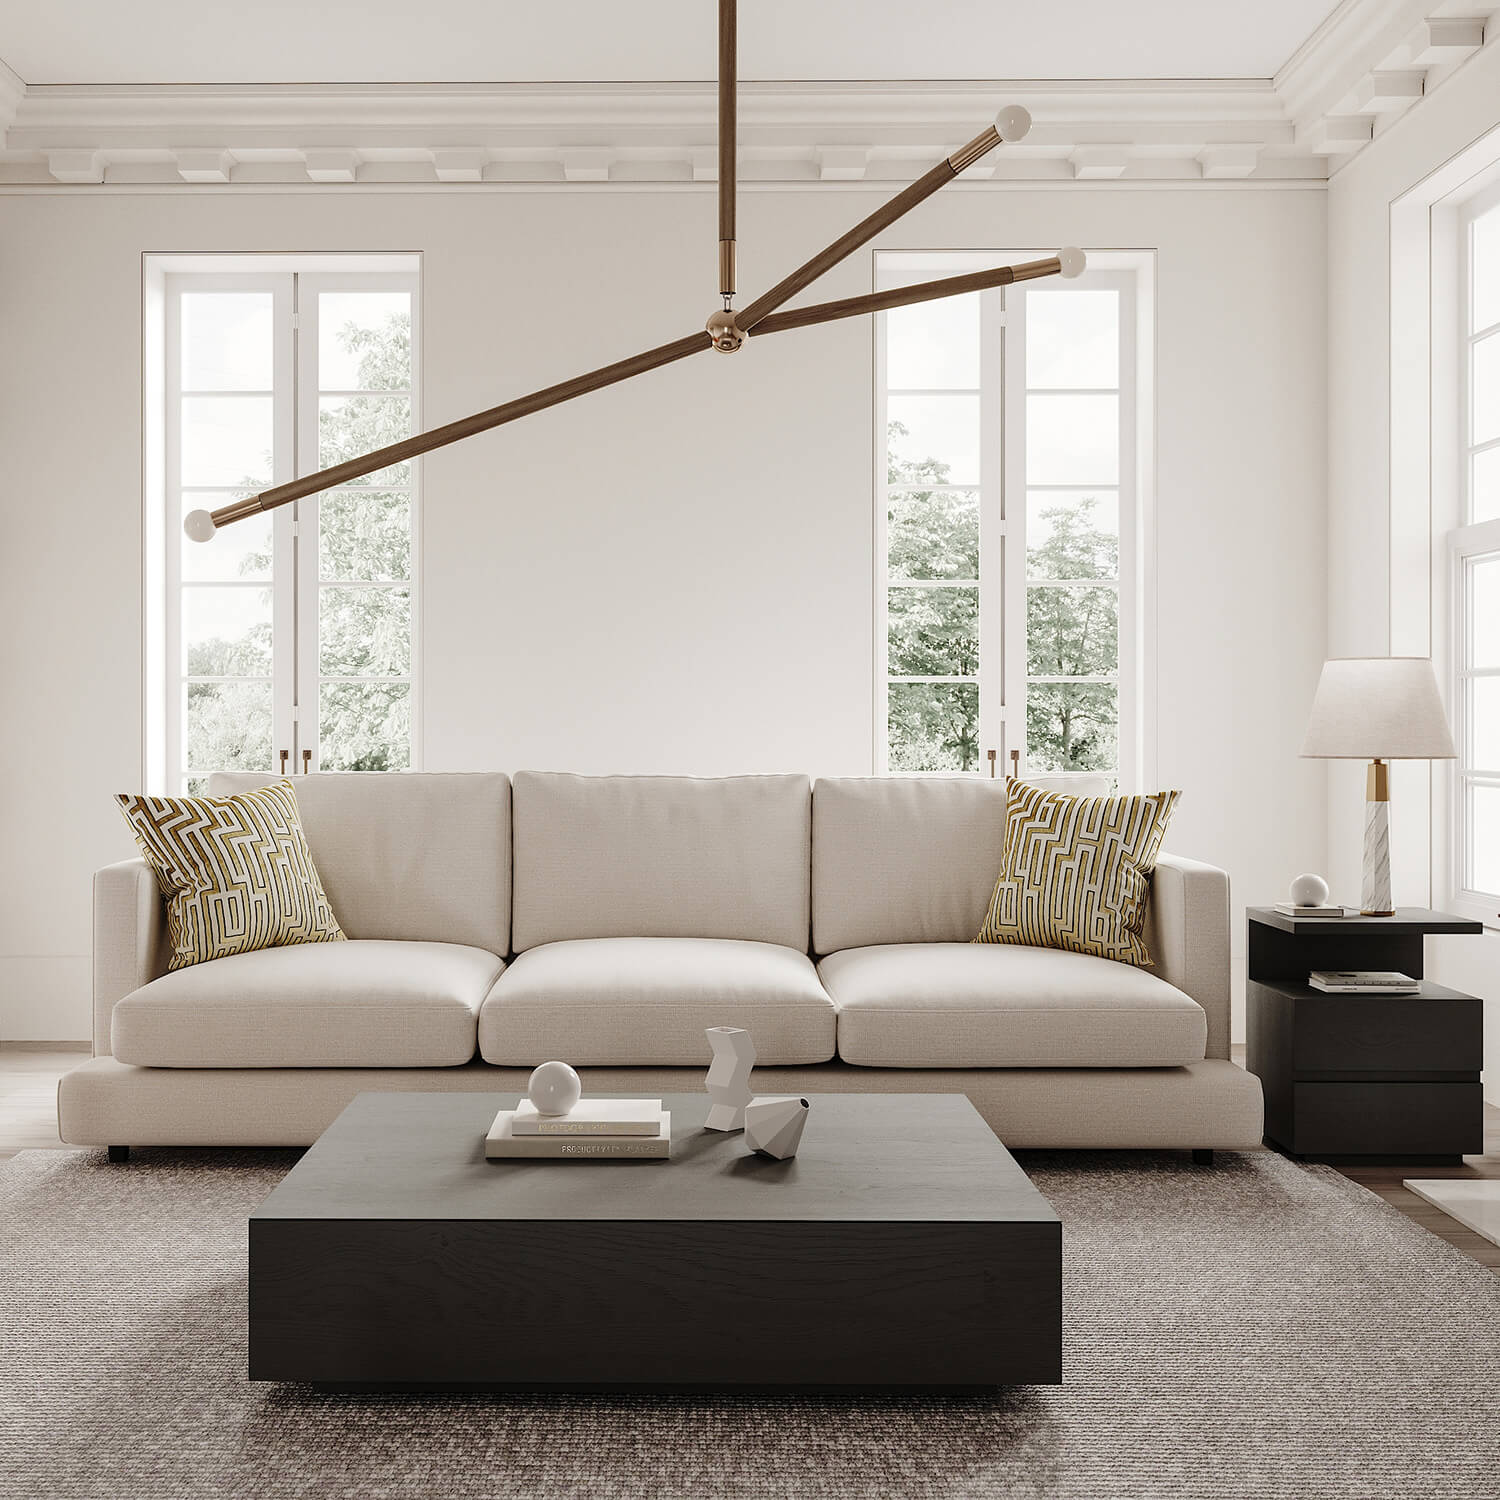 Cream three seater sofa and black coffee table in an elegant room